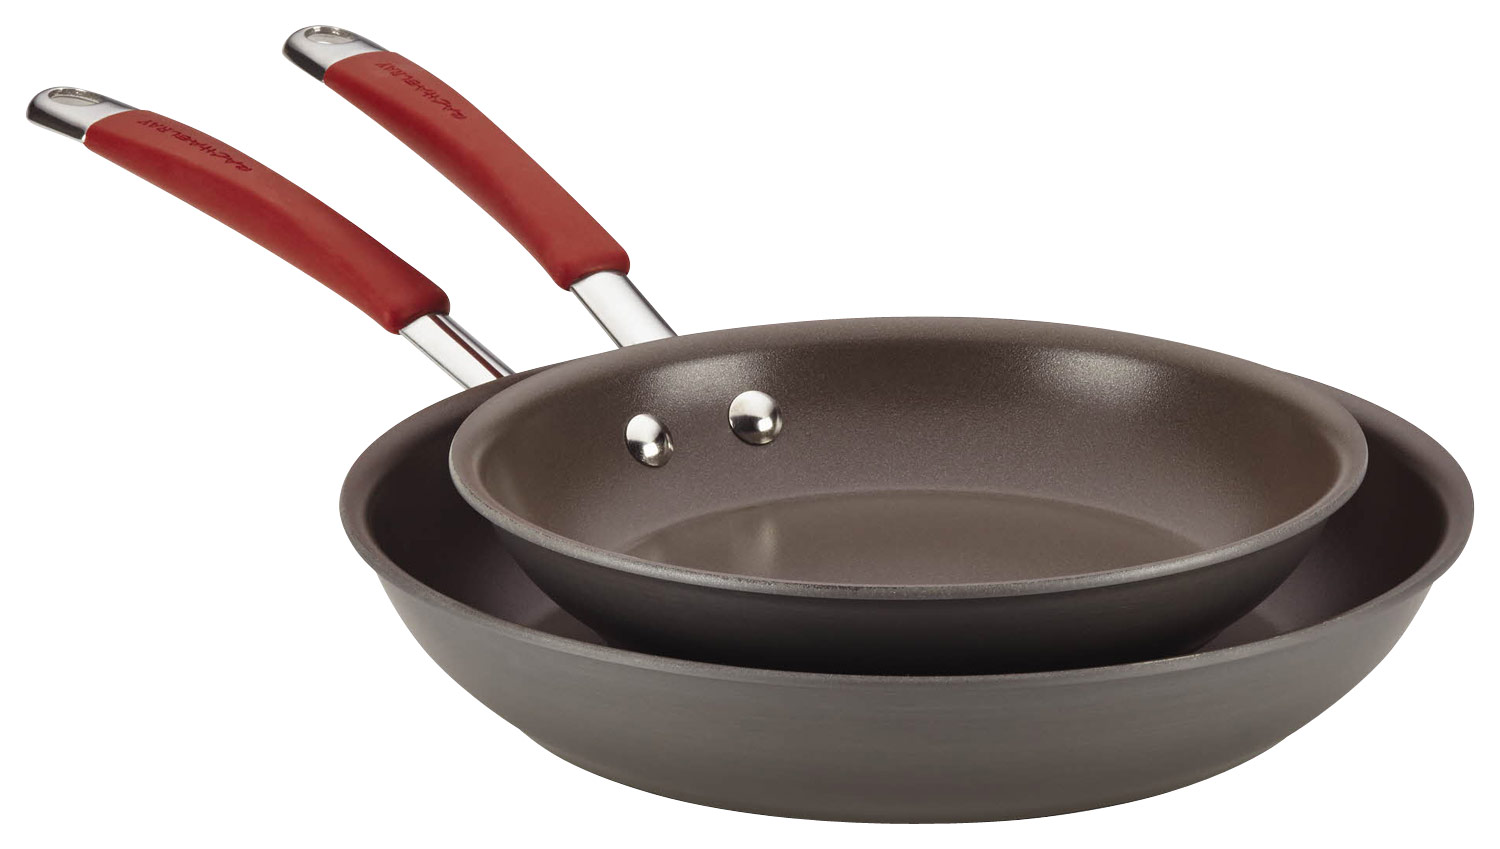 Tramontina Fry Pan Stainless Steel Induction-Ready Tri-Ply Clad 12-Inch  w/Helper Handle, 80116/057DS